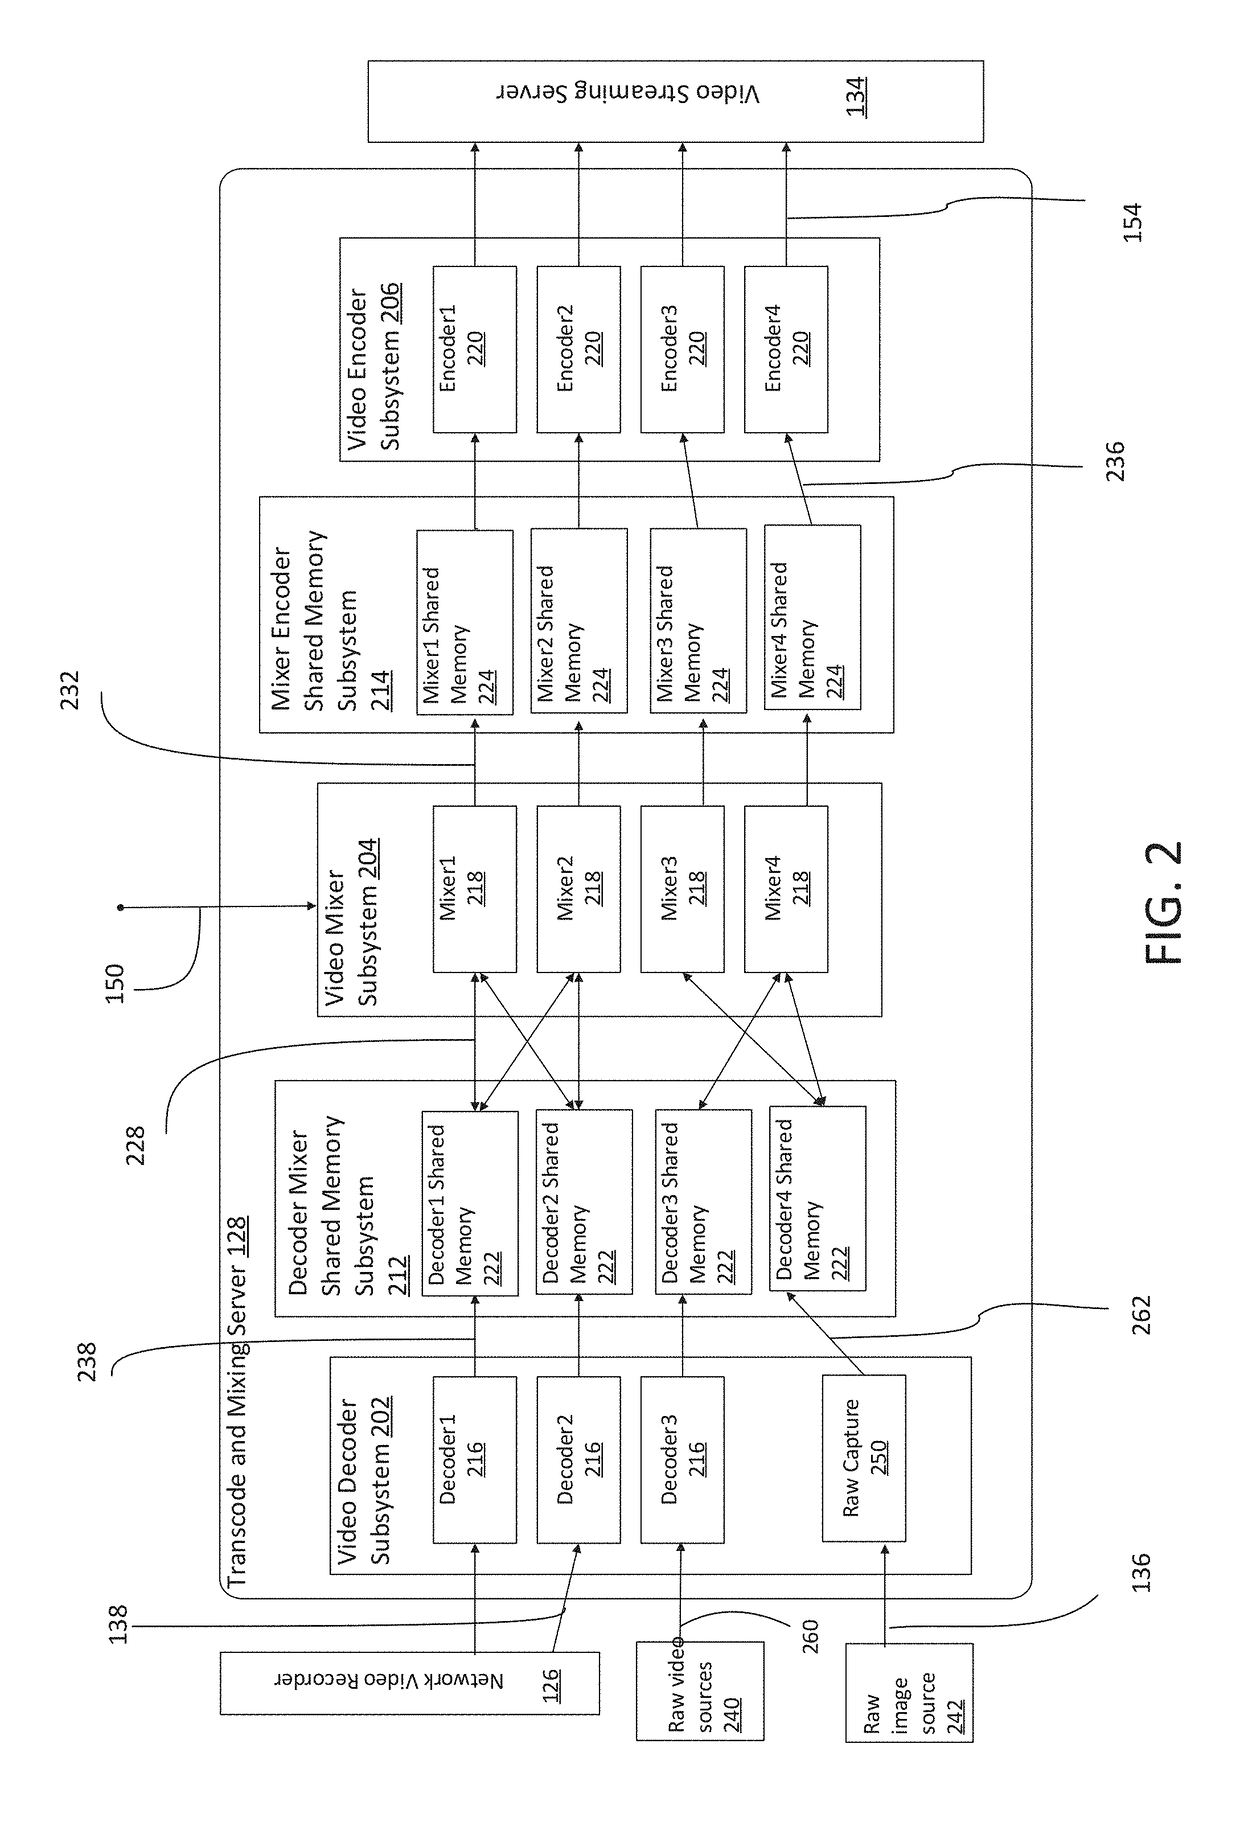 Transcoding mixing and distribution system and method for a video security system